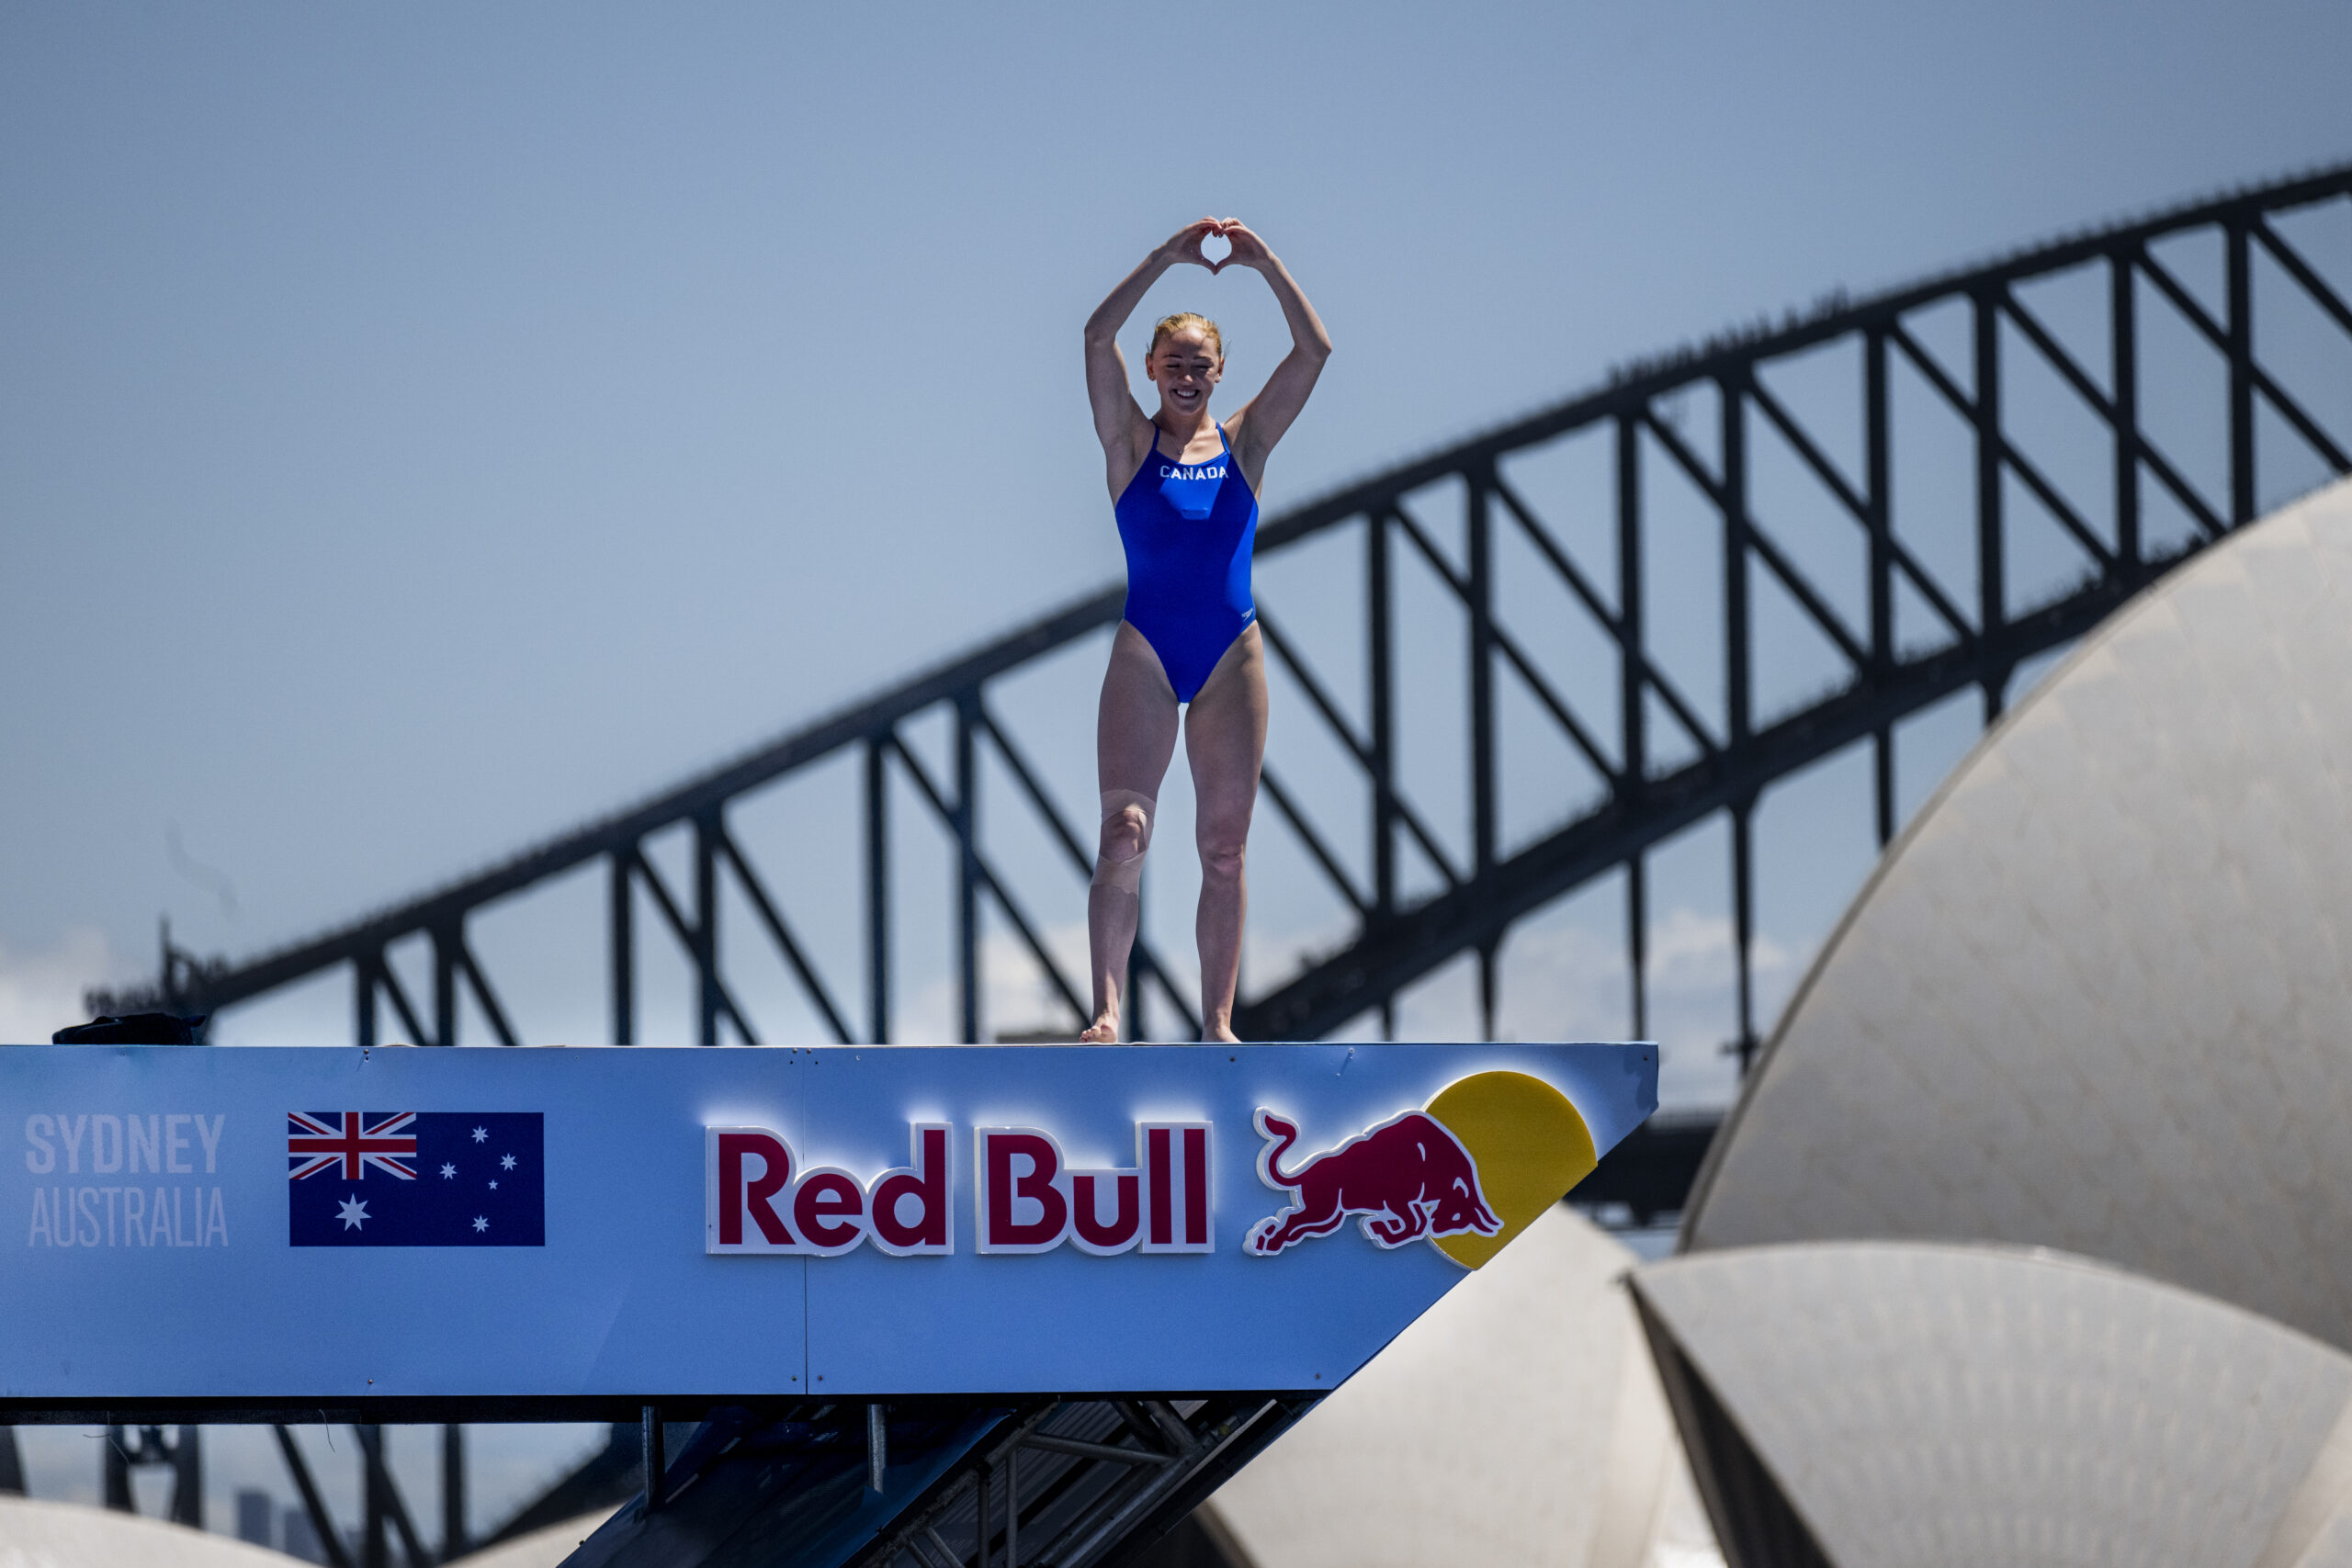 Carlson second, Macaulay eighth at final stop on the Red Bull Cliff Diving World Series tour